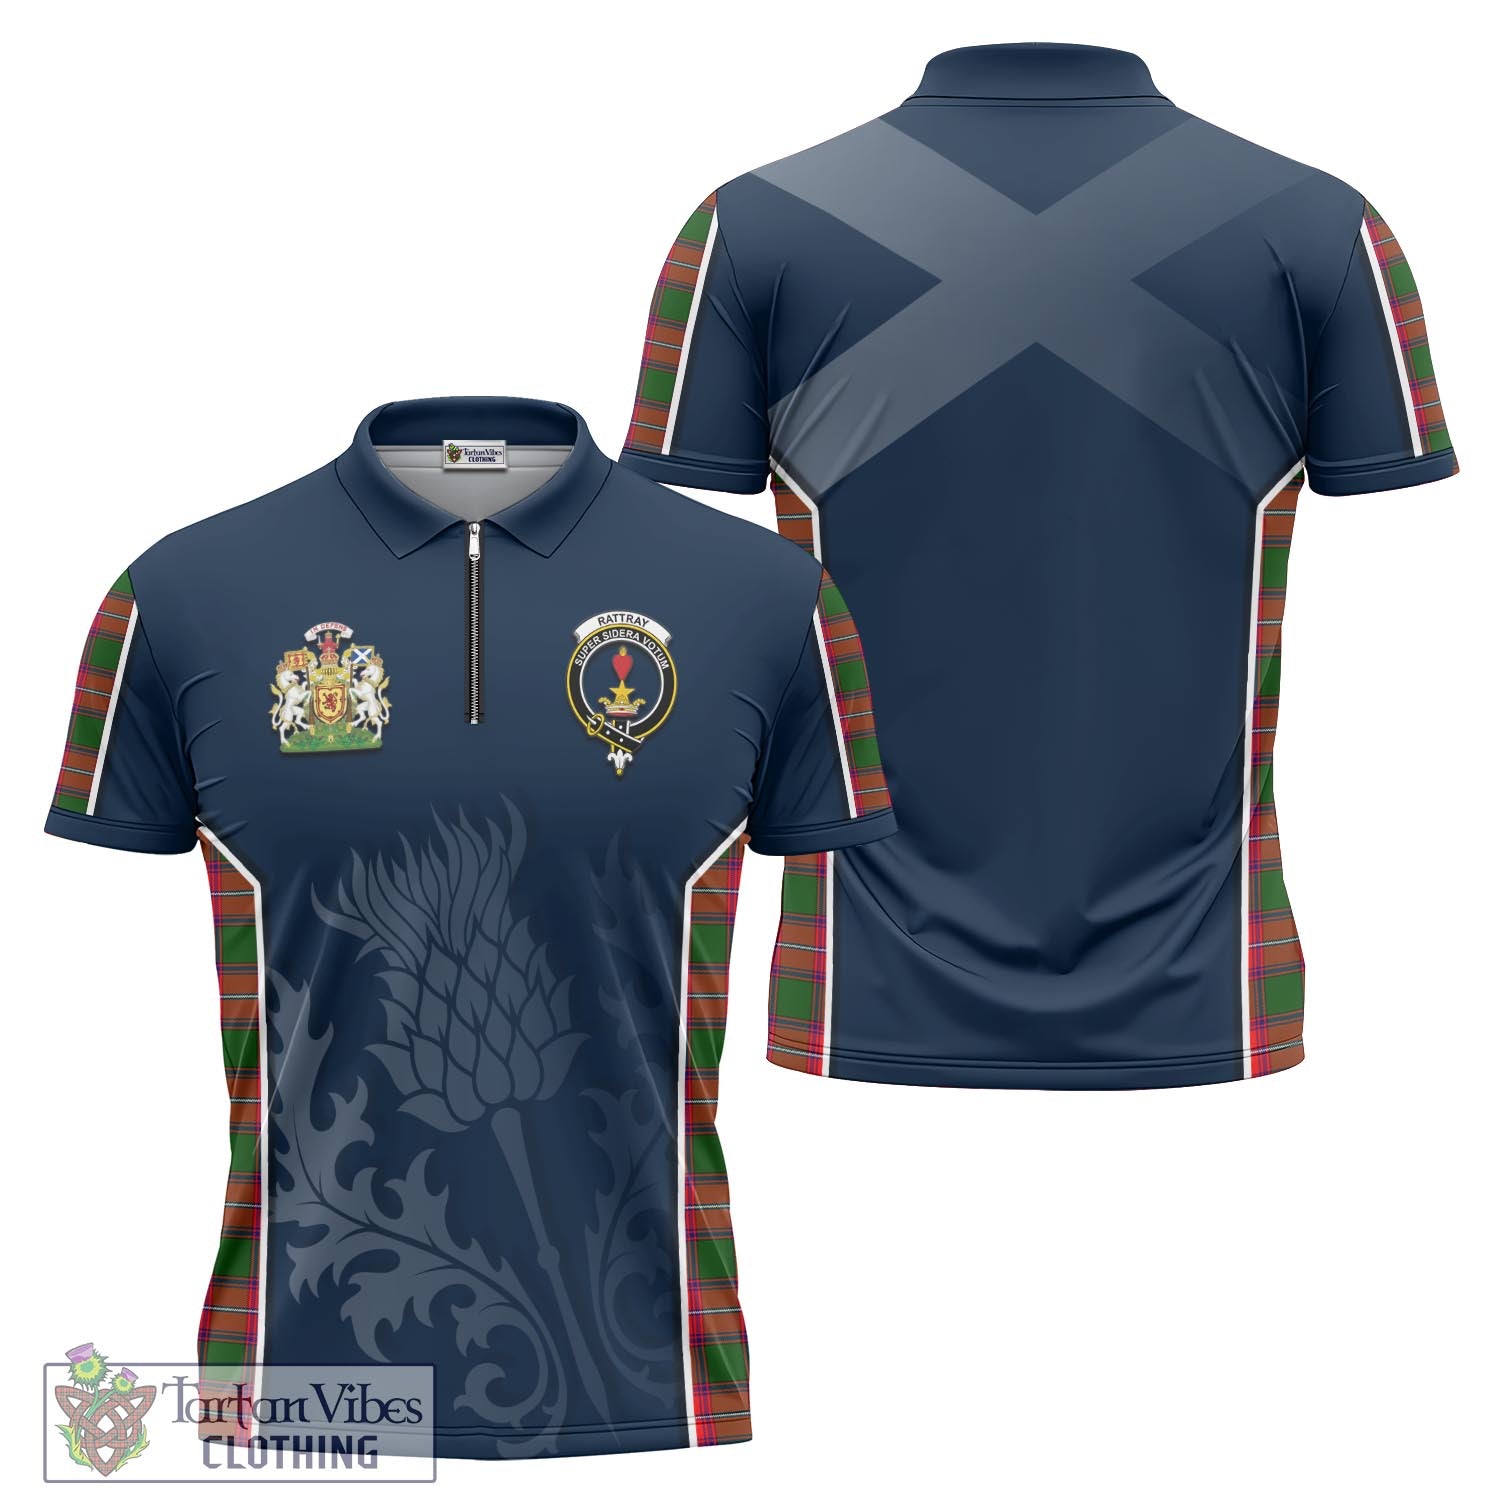 Tartan Vibes Clothing Rattray Modern Tartan Zipper Polo Shirt with Family Crest and Scottish Thistle Vibes Sport Style